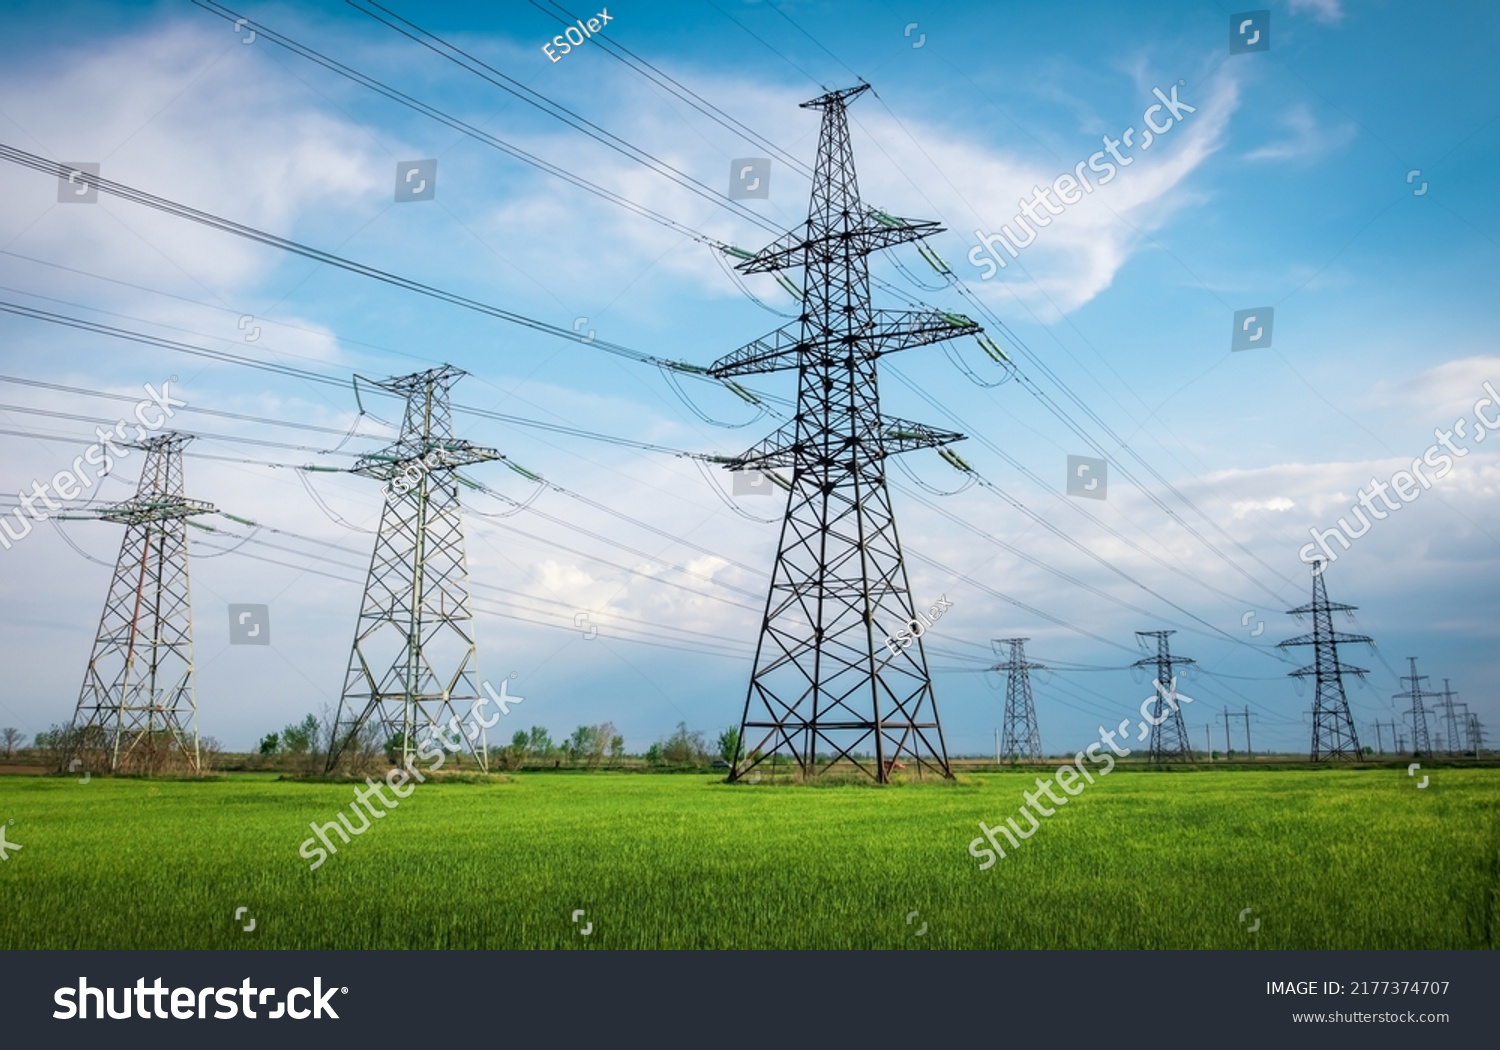 High voltage lines and power pylons in a flat and green agricultural landscape on a sunny day with clouds in the blue sky. Cloudy and rainy. Wheat is growing #2177374707